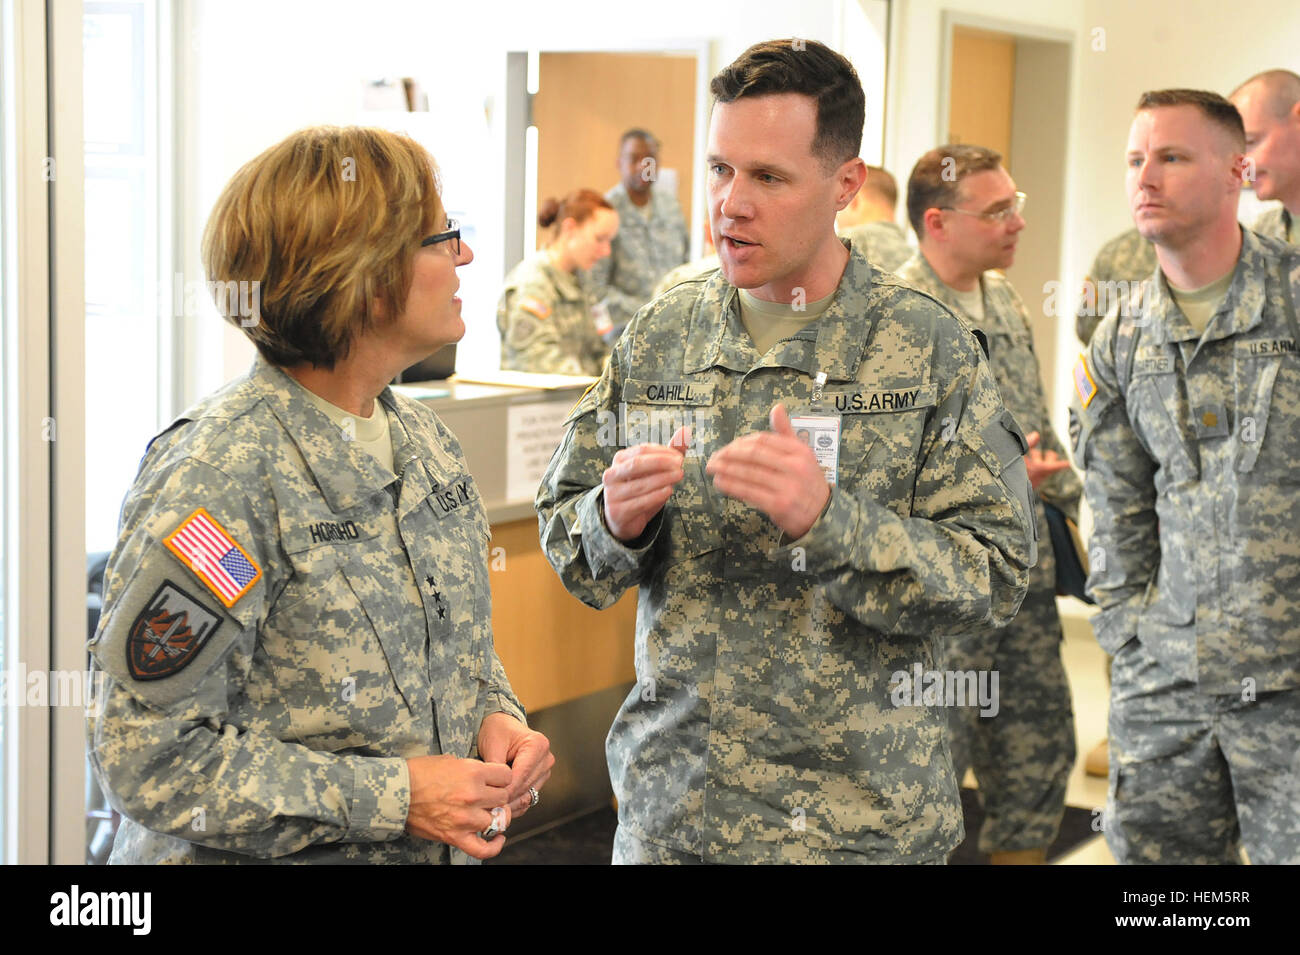 Captain  Brian P. Cahill, 2nd Cavalry Regimental Nurse, briefs Lieutenant General Patricia D. Horoho, 43rd surgeon general of the United States Army and Commander, US Army Medical Command about the implementation of the Military Health System's electronic health record, AHLTA, in the Troop Medical Clinic at  Rose Barracks, Germany on May 09, 2012.  Implementing the EHR at the TMC allows the Regiment's medical providers to document soldier medical care, which can be viewed at any Military Medical Treatment Facility in the world.  Under the new system, soldiers who require care at facilities, in Stock Photo